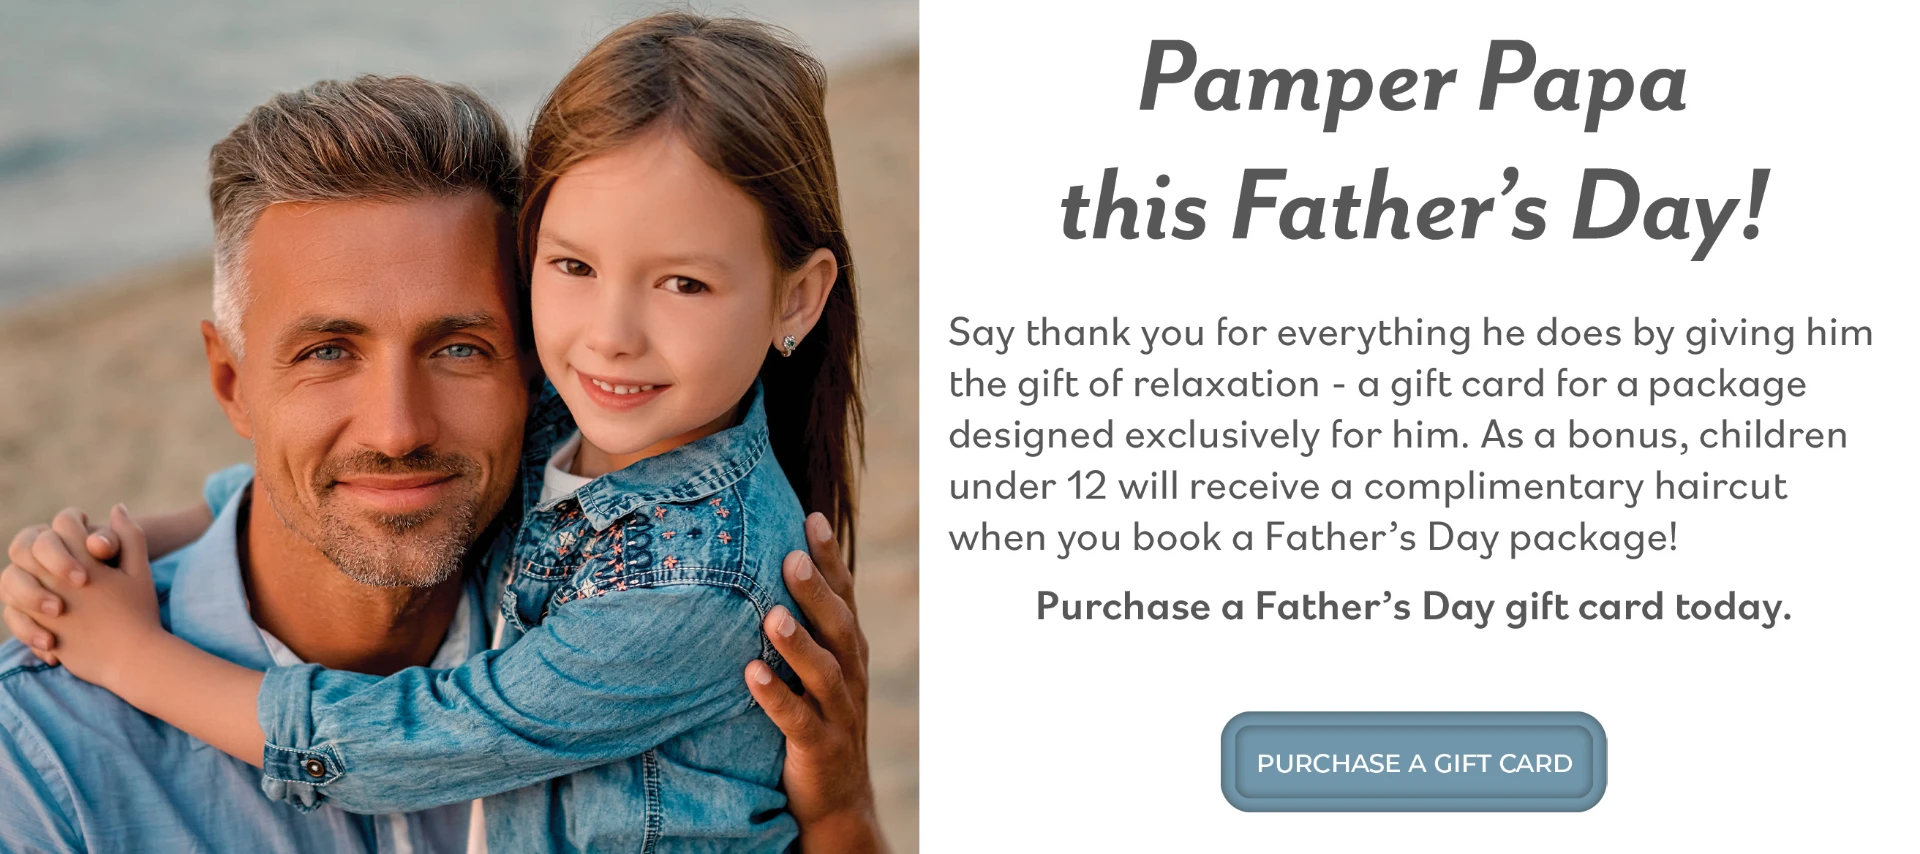 Pamper Papa this Father's Day! Say thank you for everything he does by giving him the gift of relaxation - a gift card for a package designed exclusively for him. As a bonus, children under 12 will receive a complimentary haircut when you book a Father's Day package! Purchase a Father's Day gift card today.